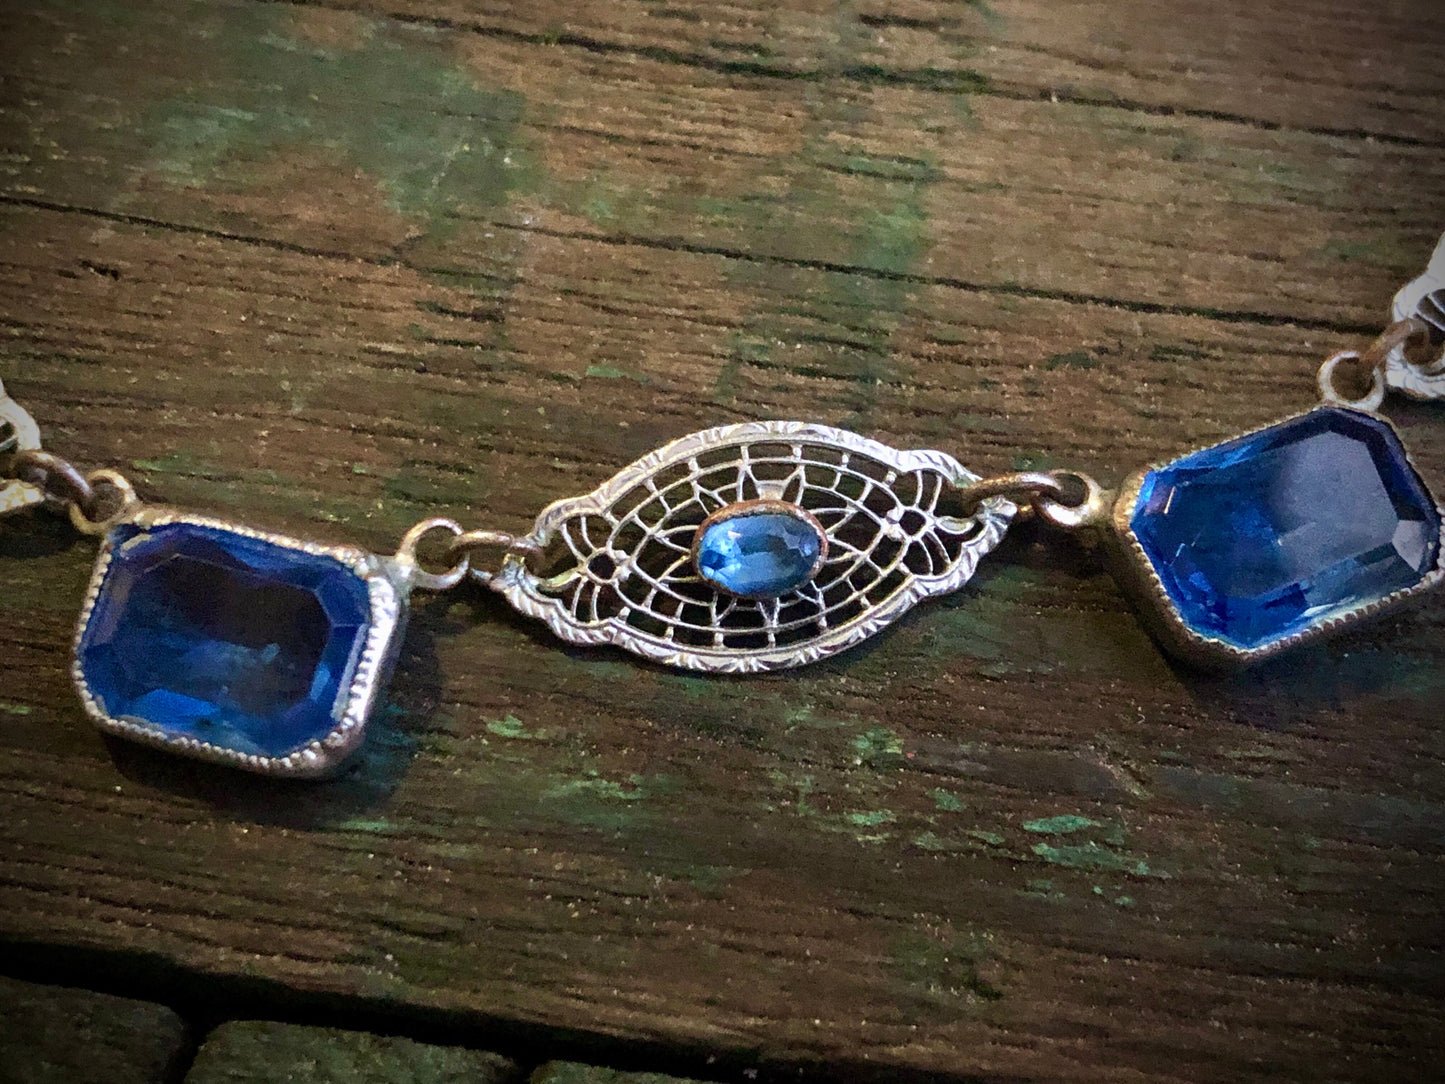 Antique Rhodium Plated Brass Filigree Necklace with Blue Paste Stones